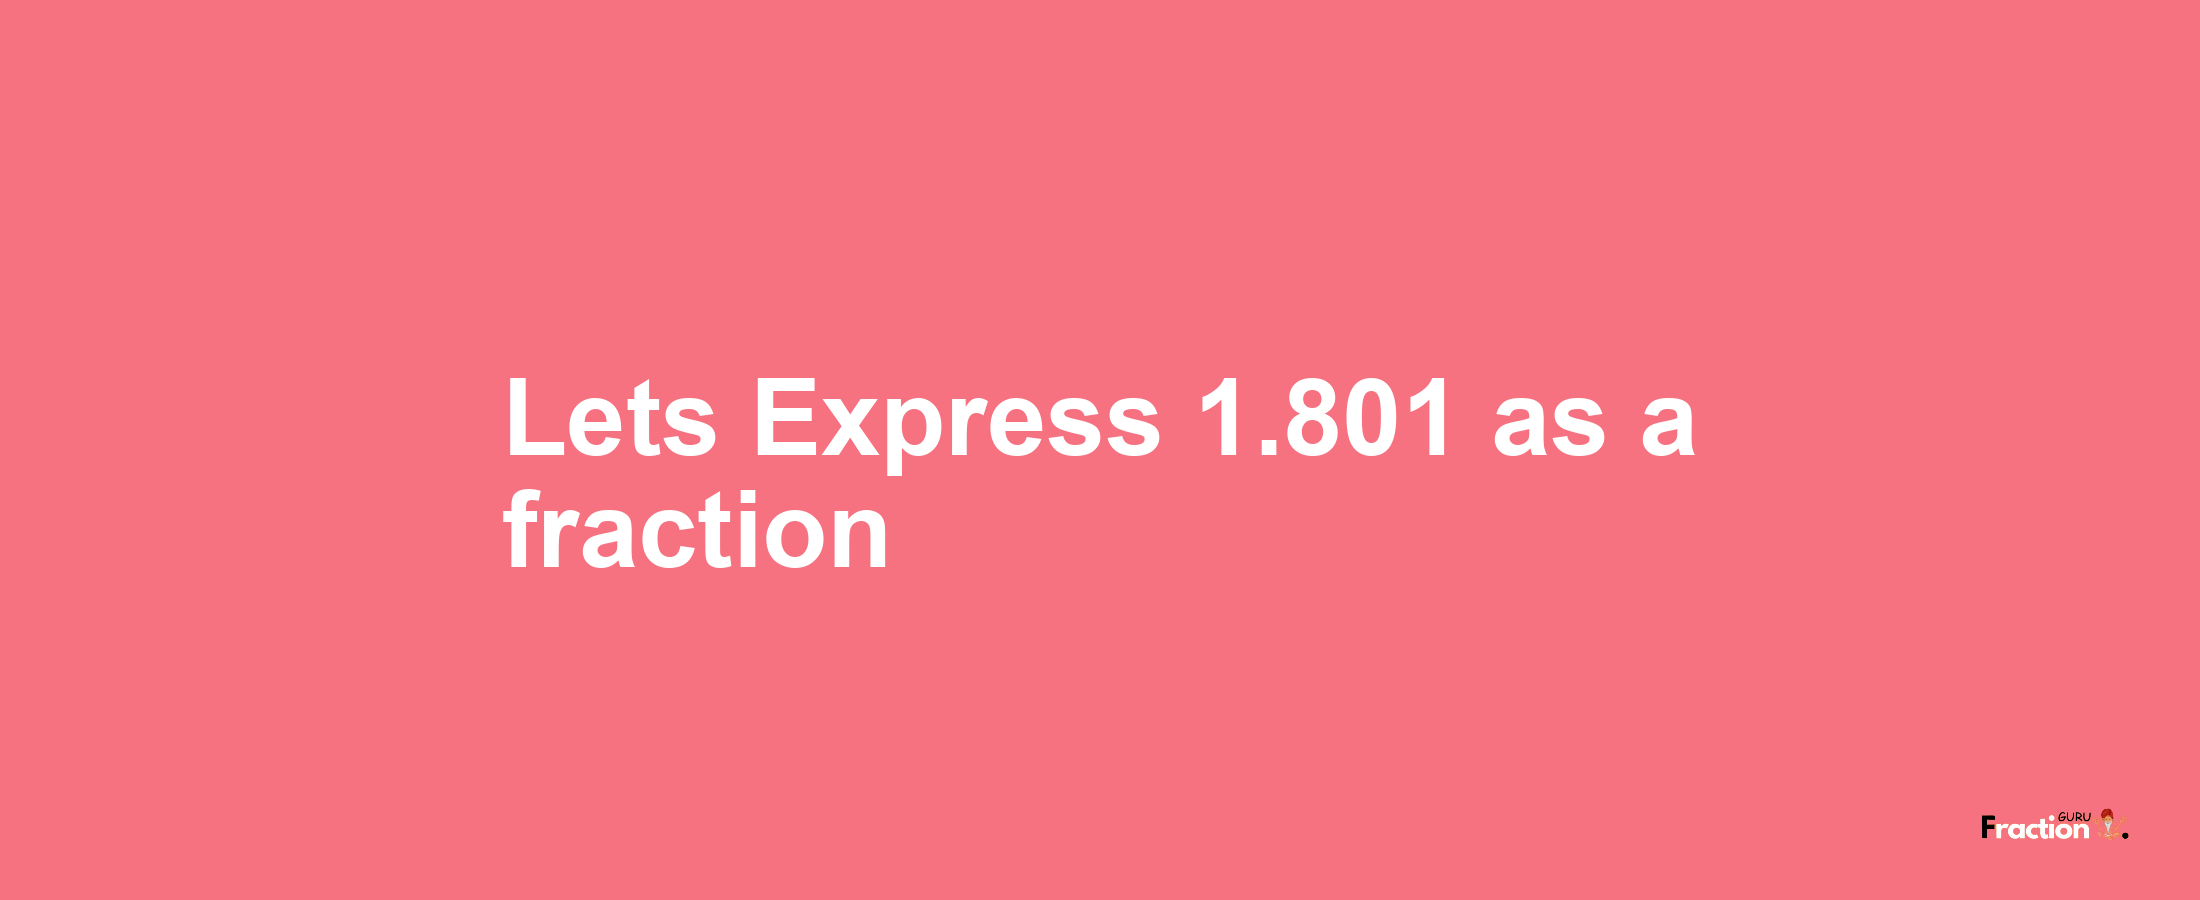 Lets Express 1.801 as afraction